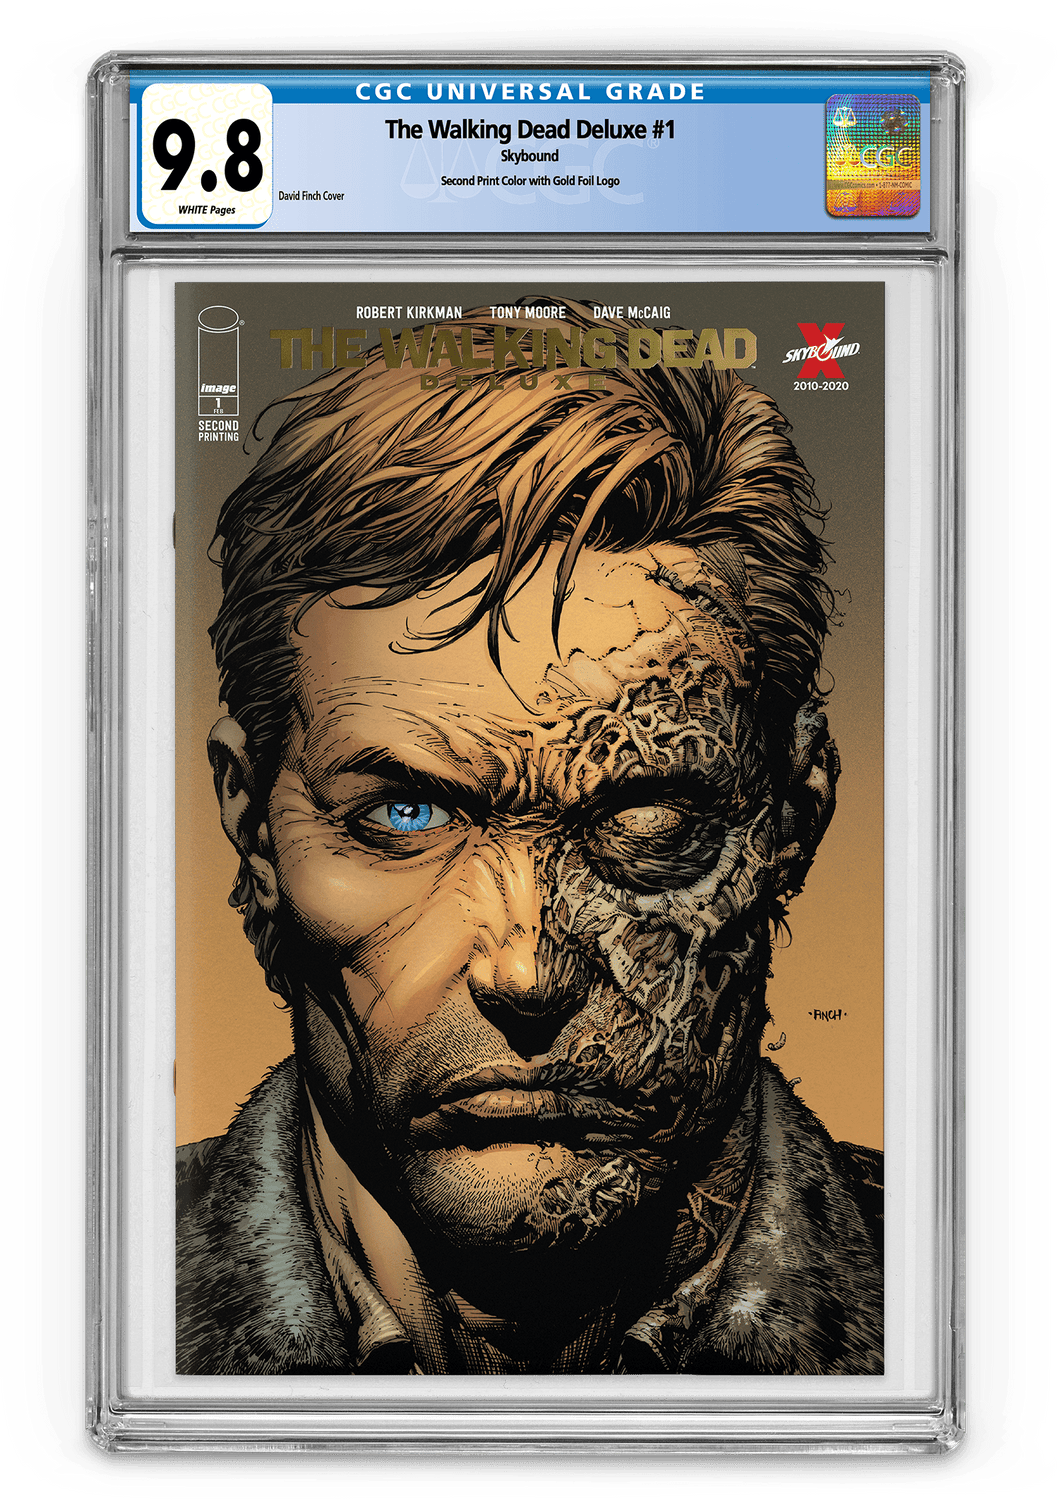 The Walking Dead Deluxe #1 Second Print Color with Gold Foil Logo CGC 9.8